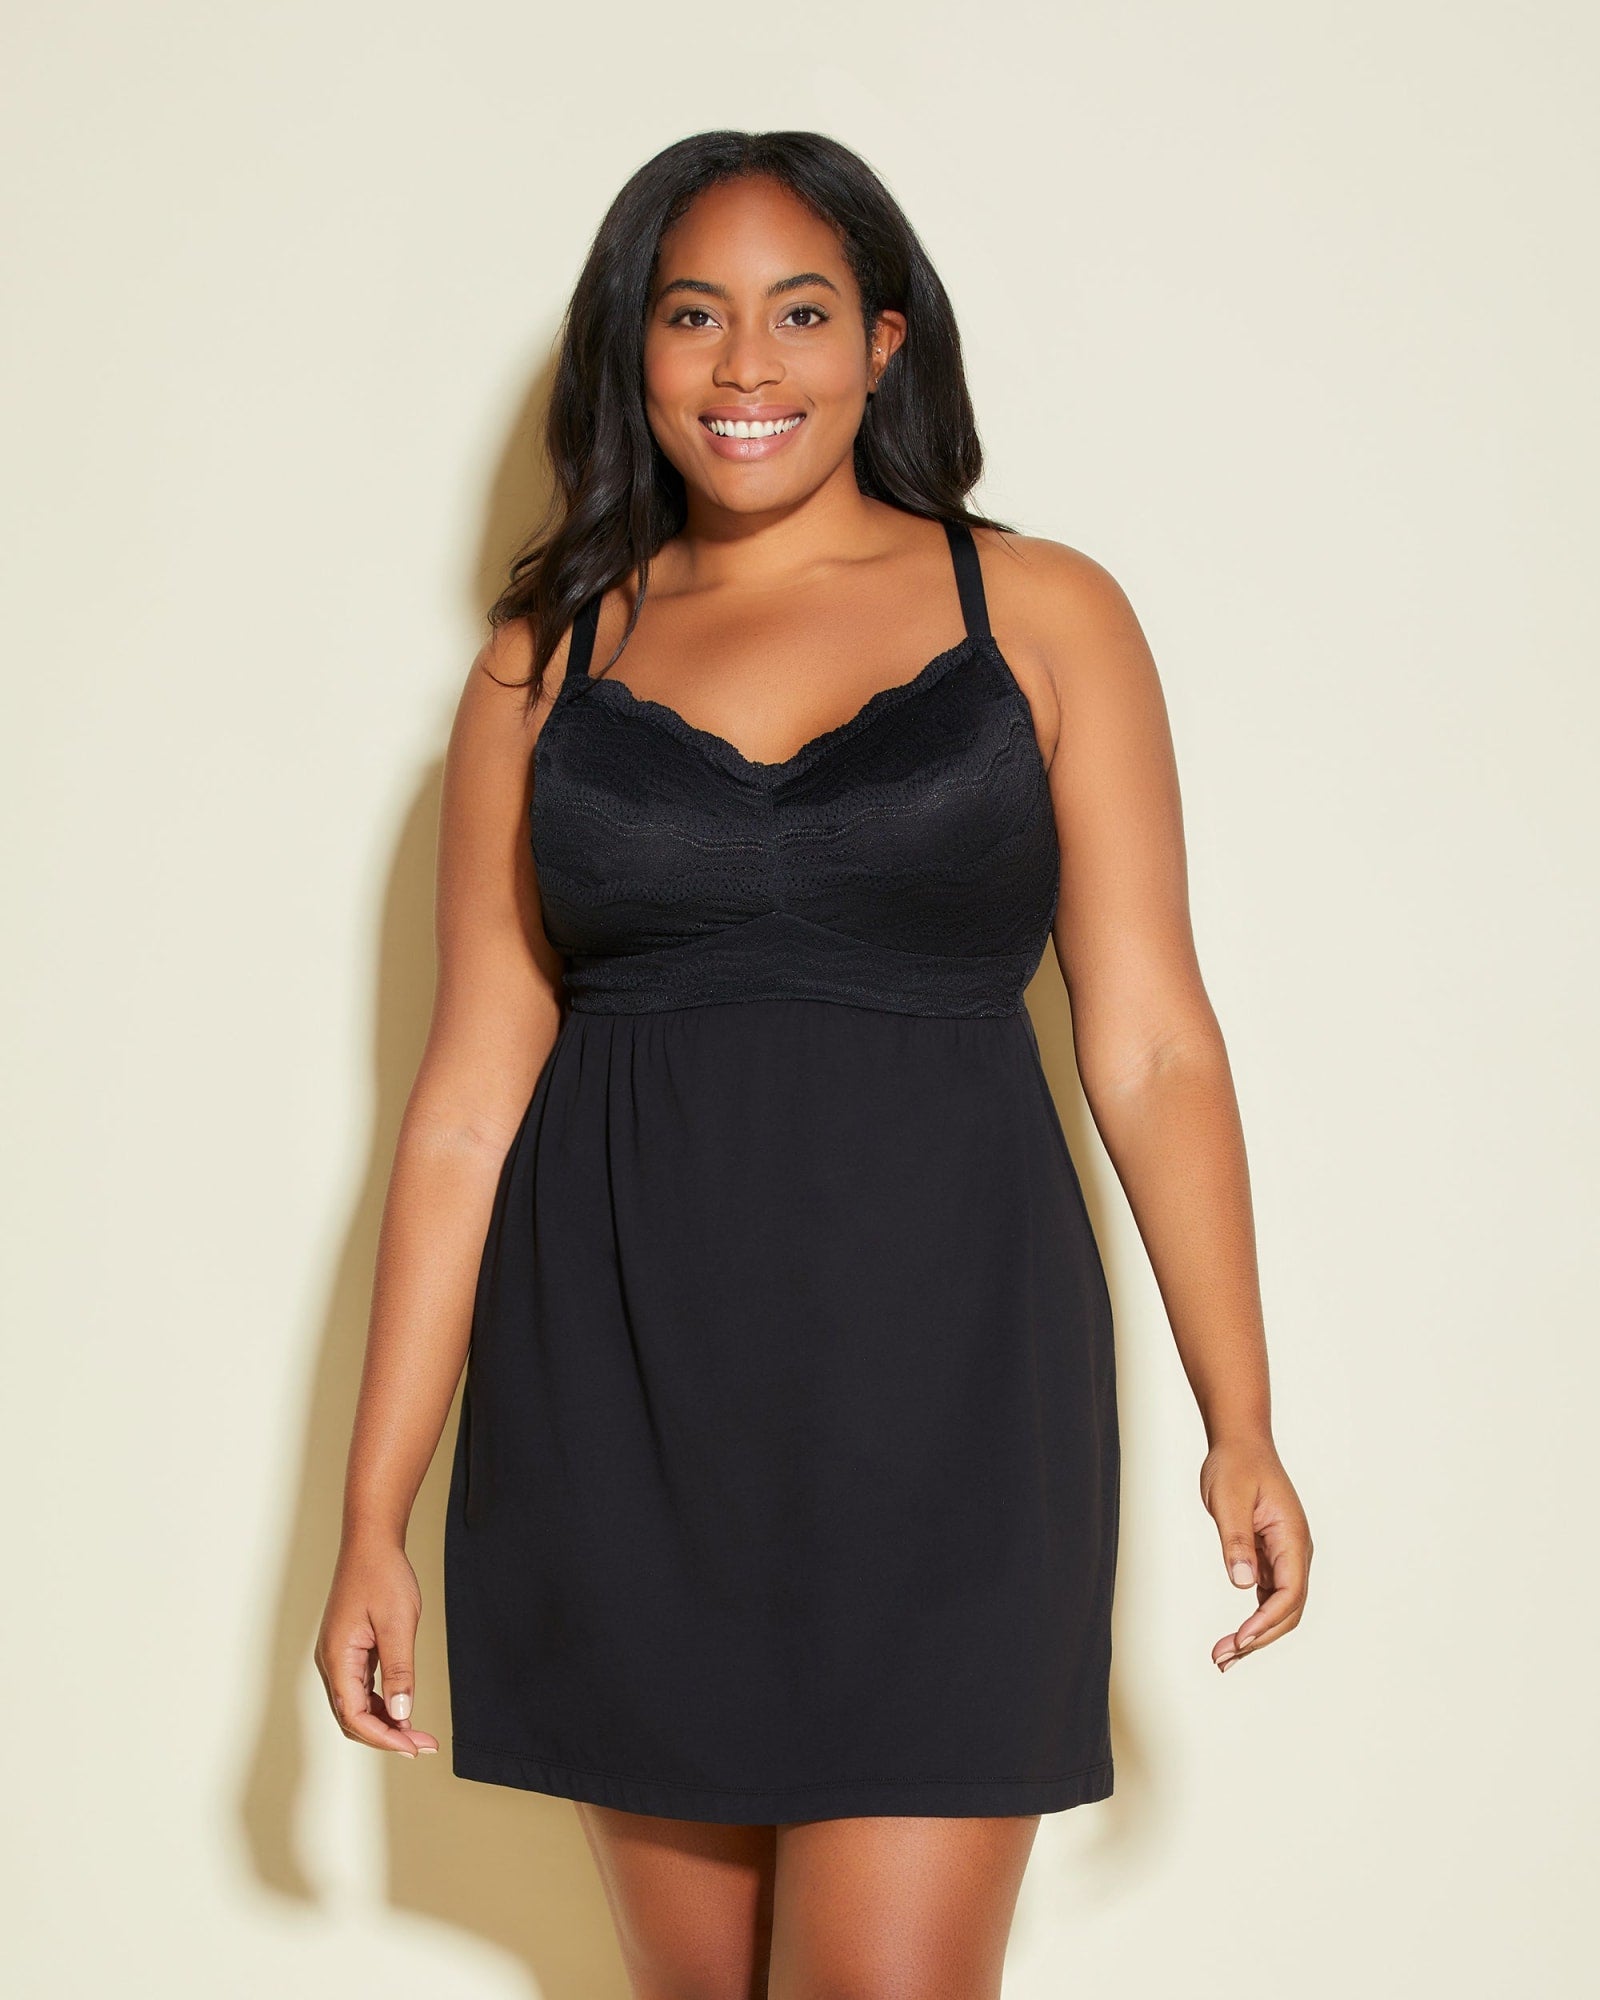 Plus Size Bust Support Chemise